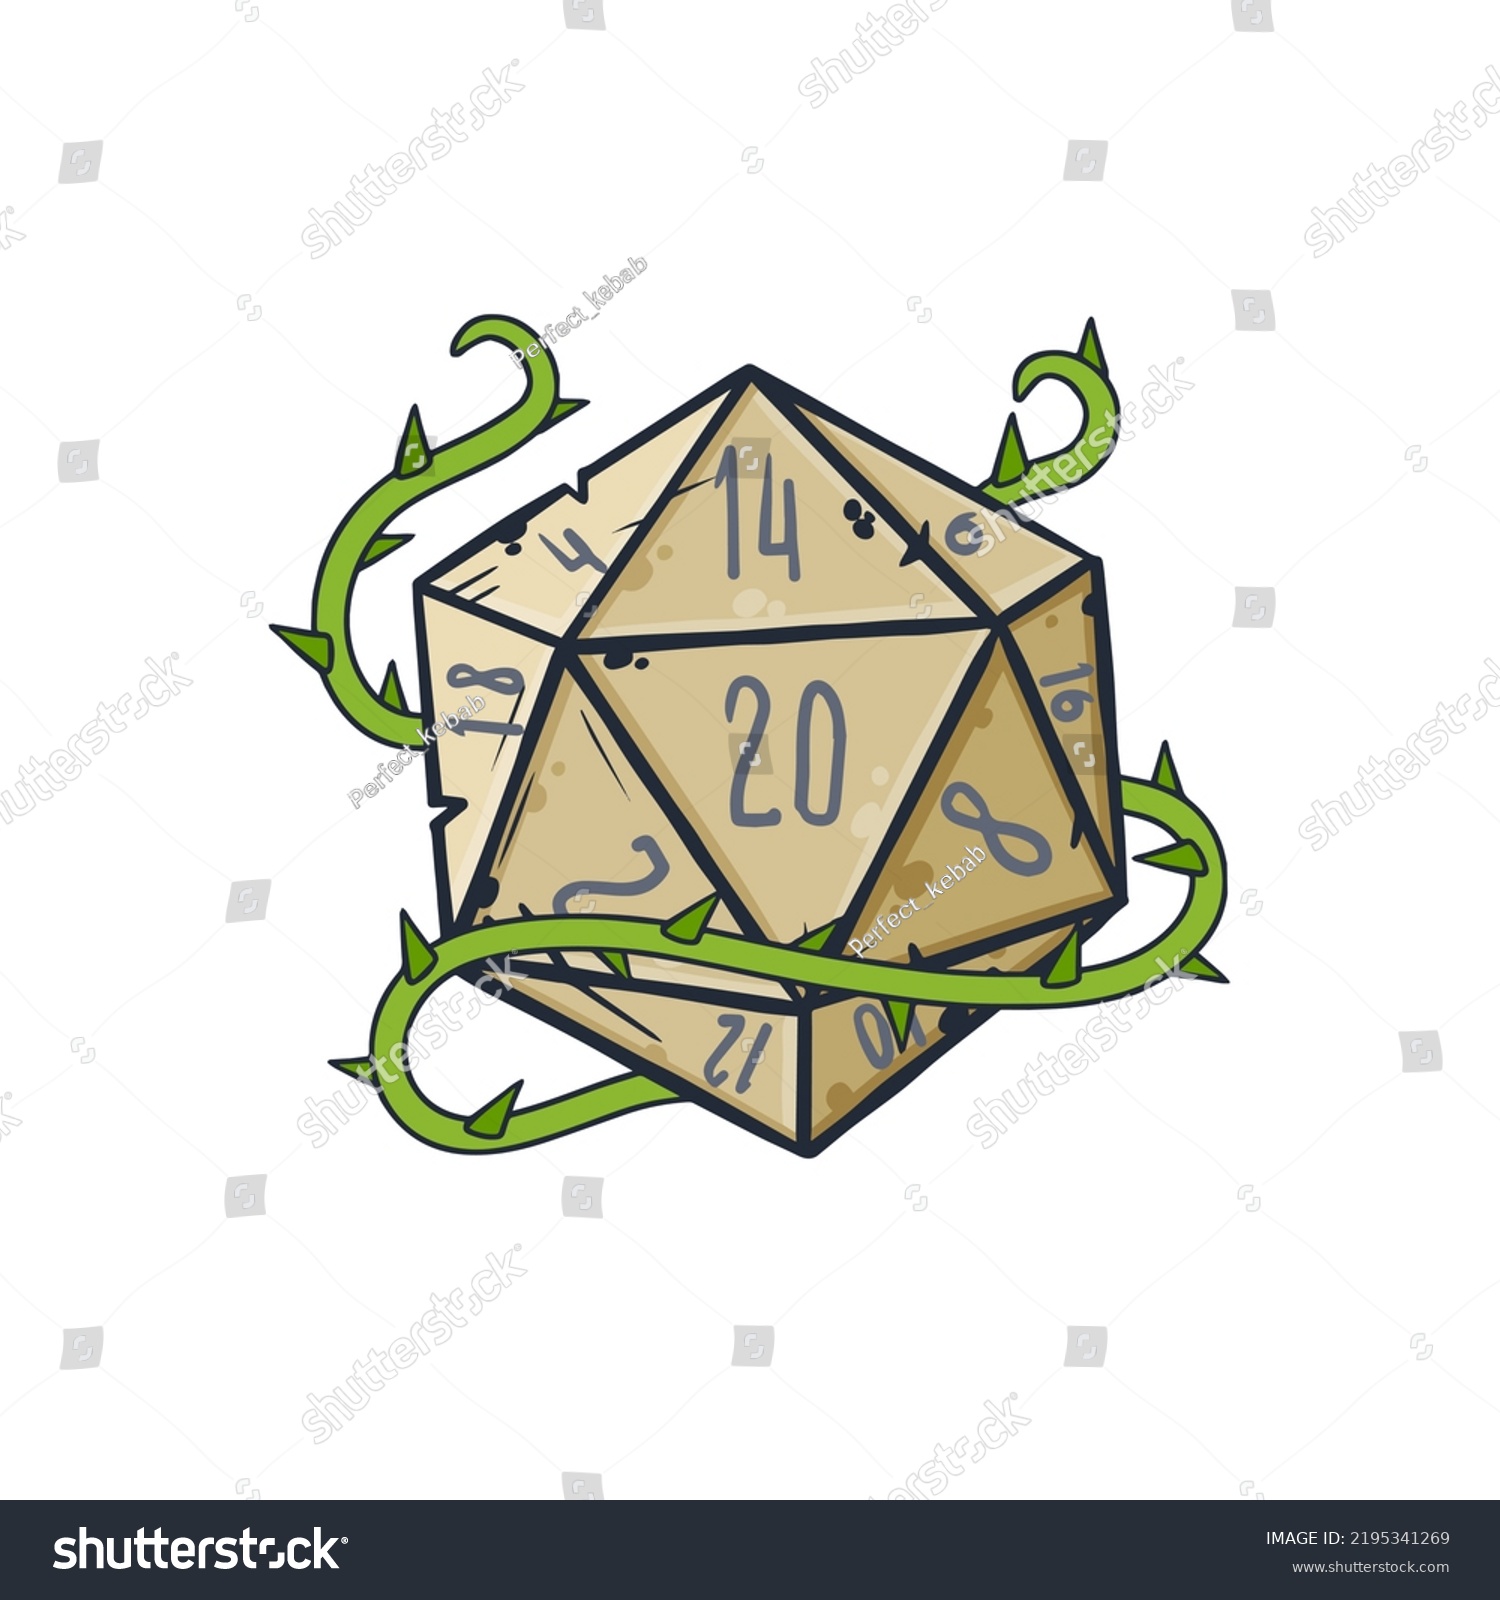 SVG of Dice d20 for playing Dnd. Dungeon and dragons board game. Cartoon outline drawn illustration. Green plant with thorn svg